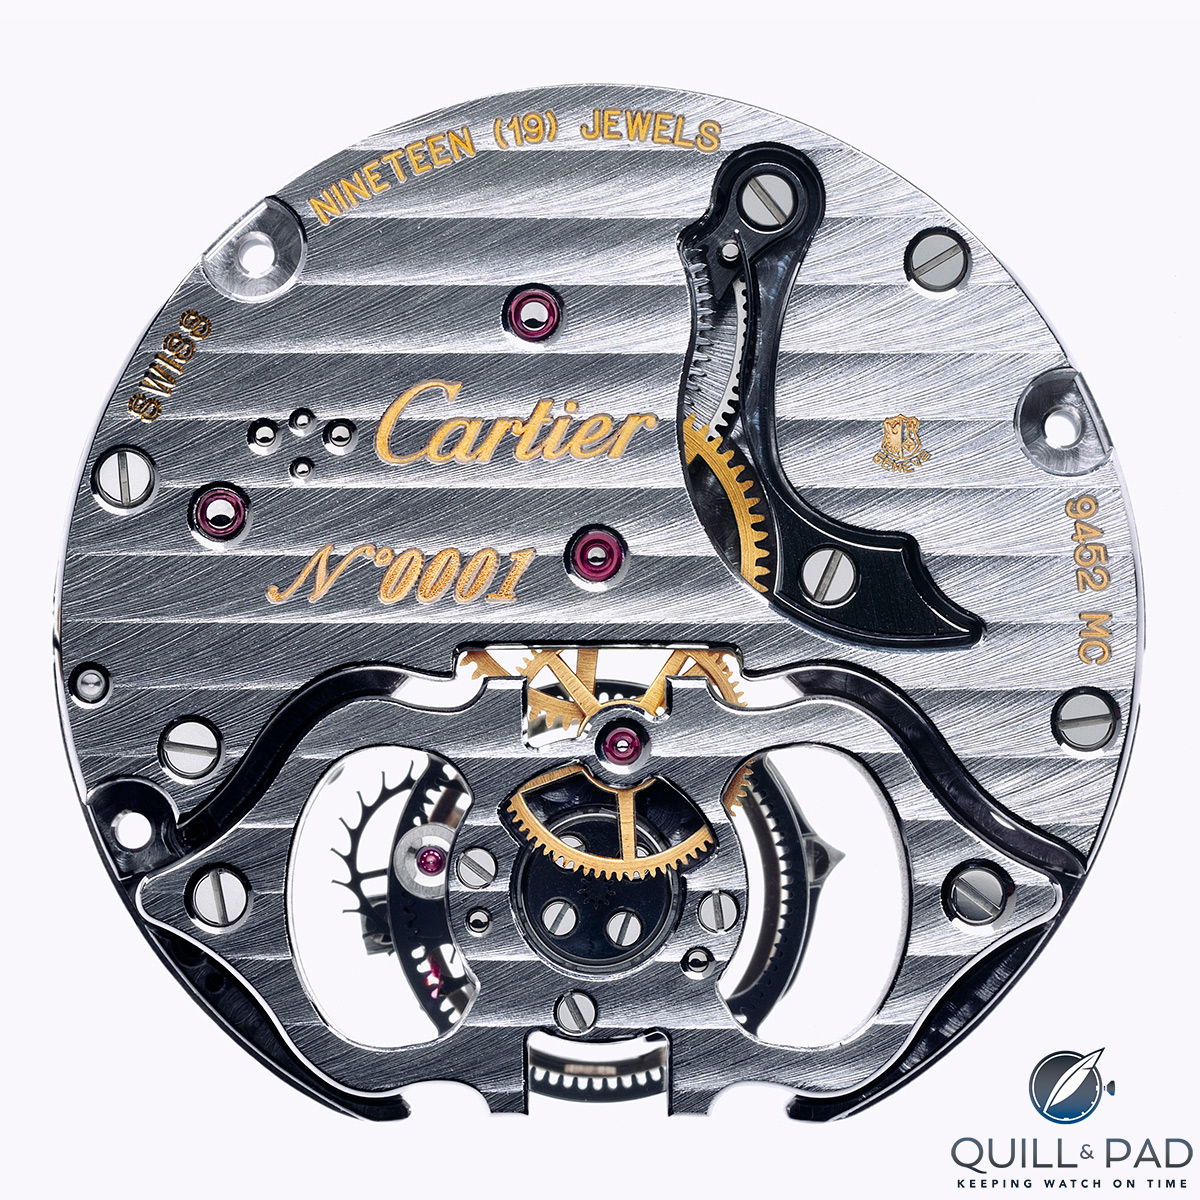 The Geneva Seal is visible at 2 o'clock on this Cartier movement